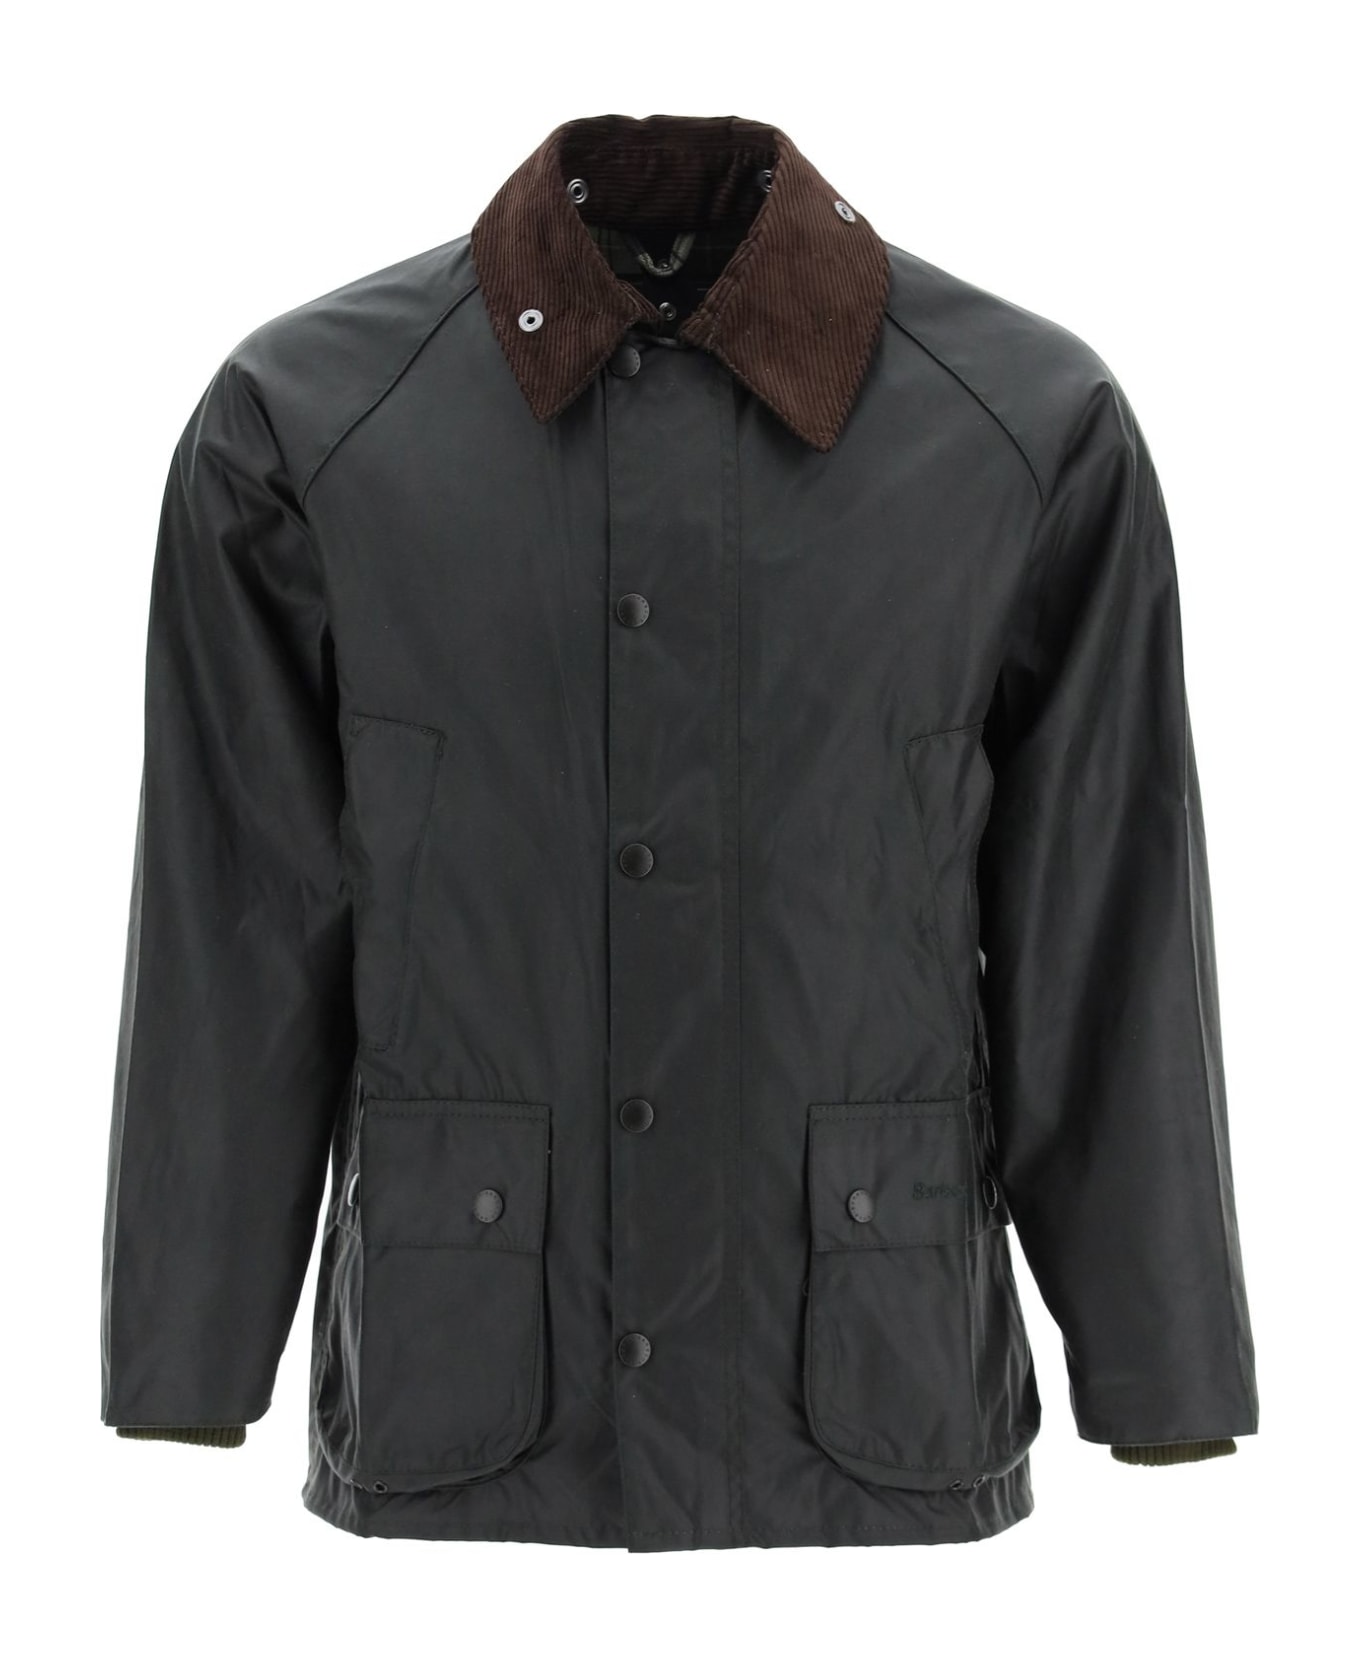 Barbour Bedal Jacket - Green